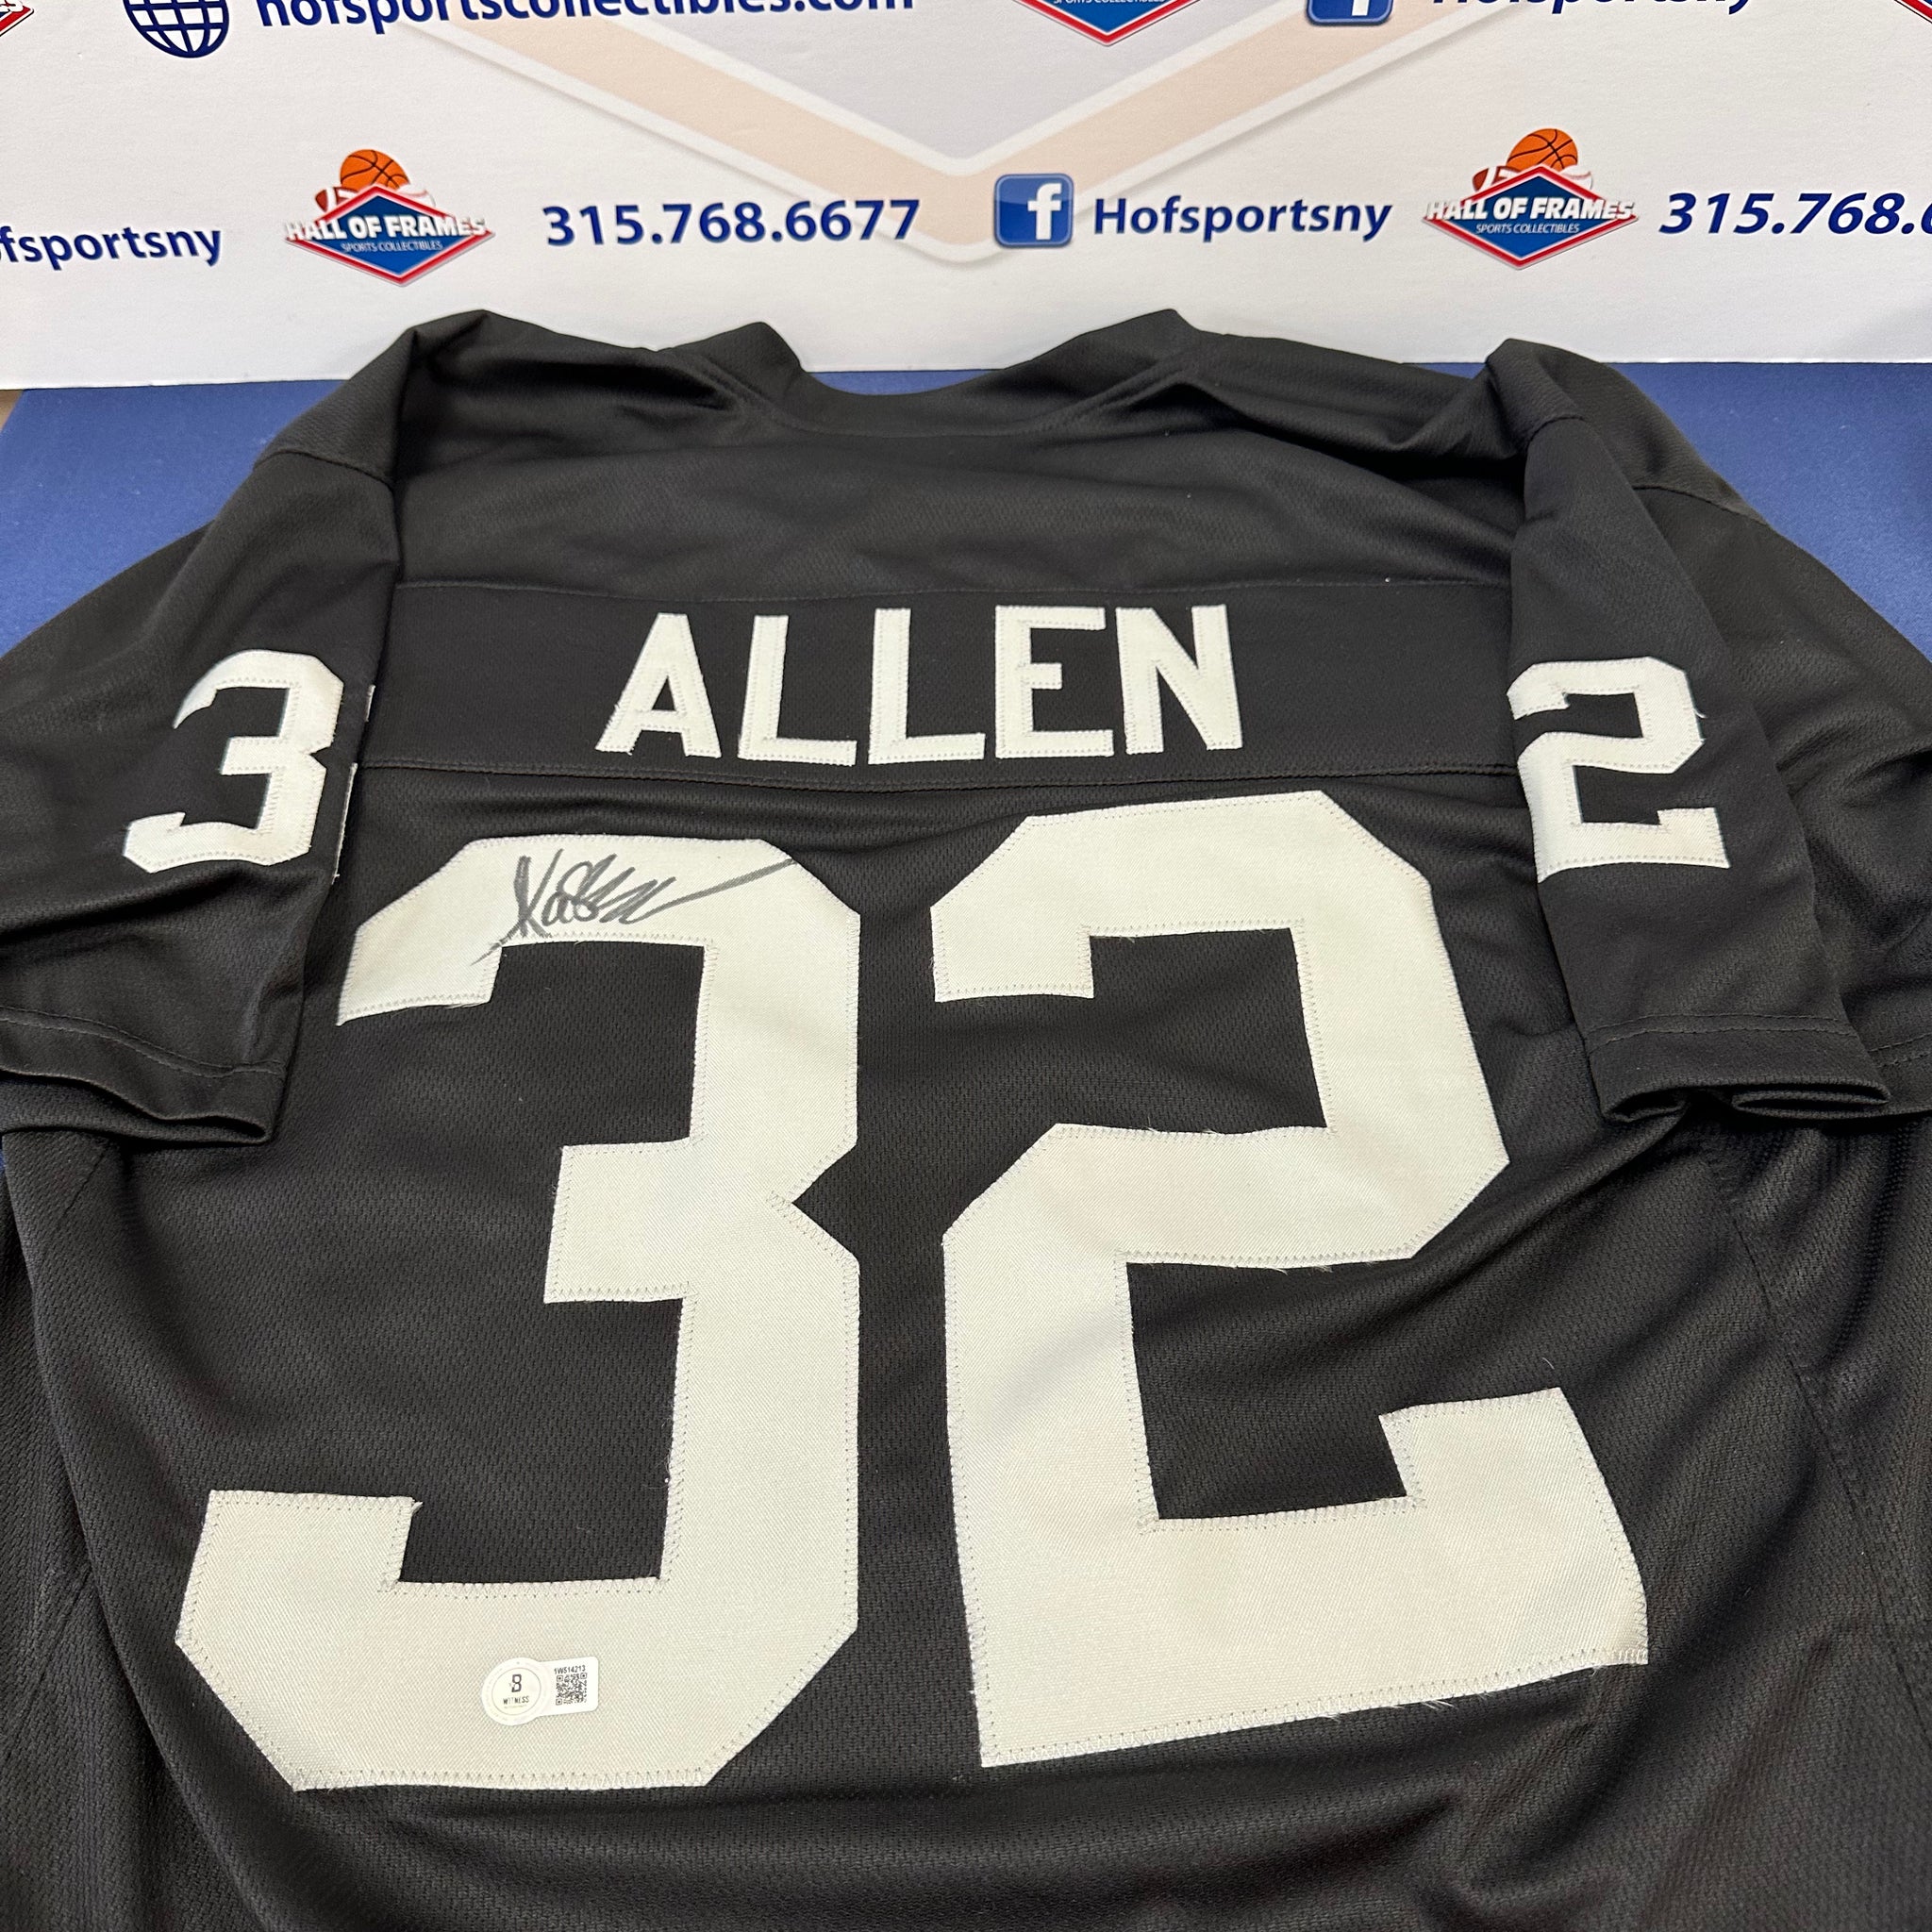 MARCUS ALLEN OAKLAND RAIDERS SIGNED CUSTOM JERSEY! BAS AUTHENTIC!